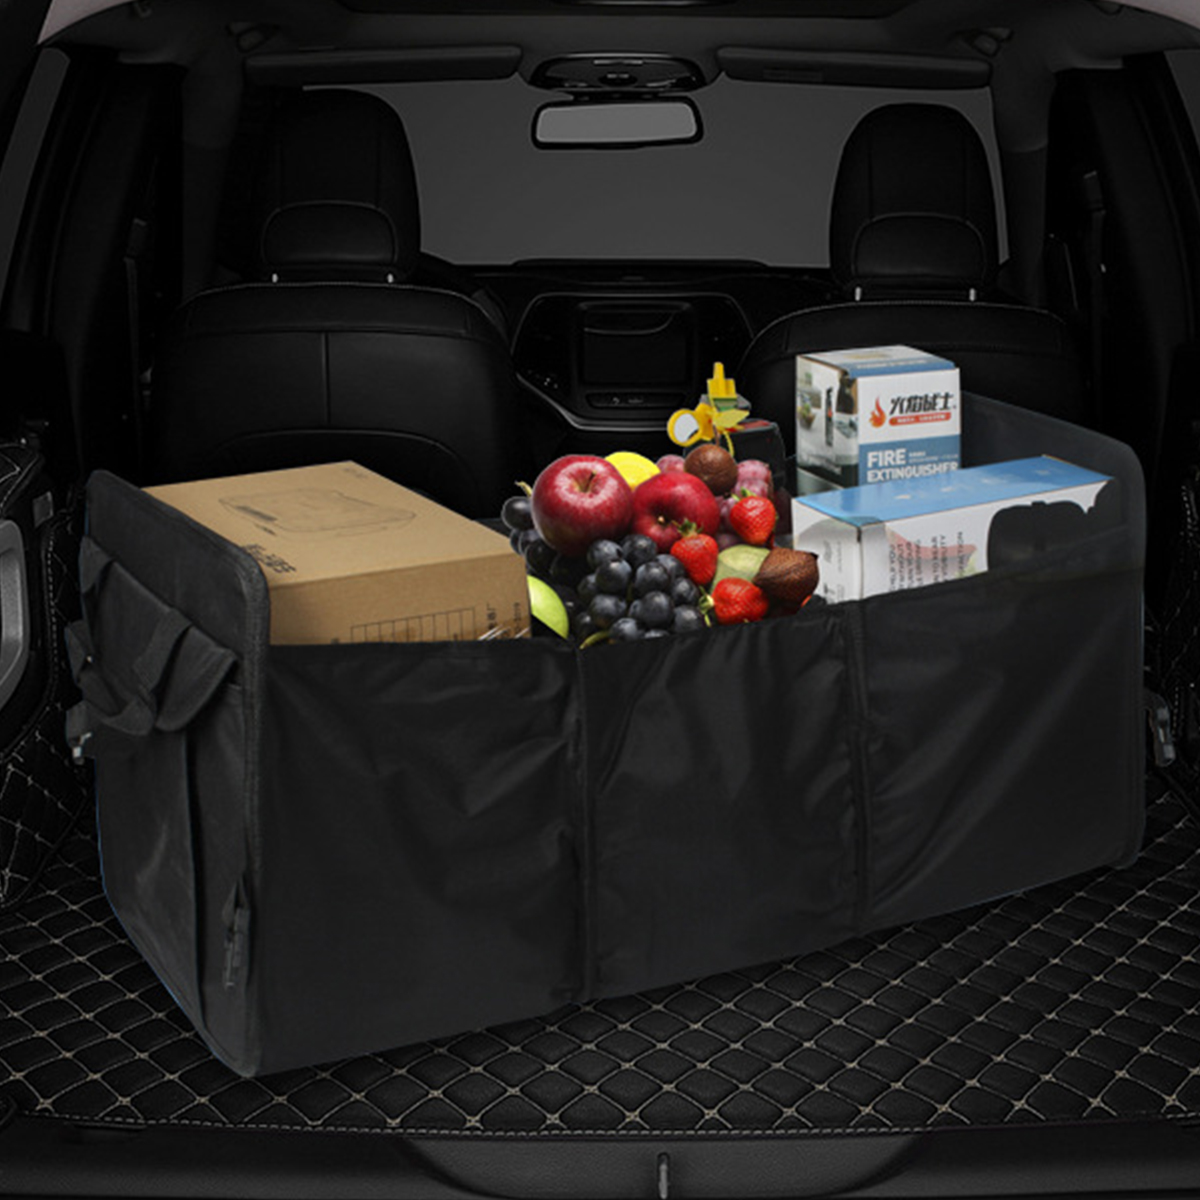 52L-Foldable-Car-Trunk-Boot-Organizer-Collapsible-Box-Storage-Pocket-Case-Holder-1622233-4